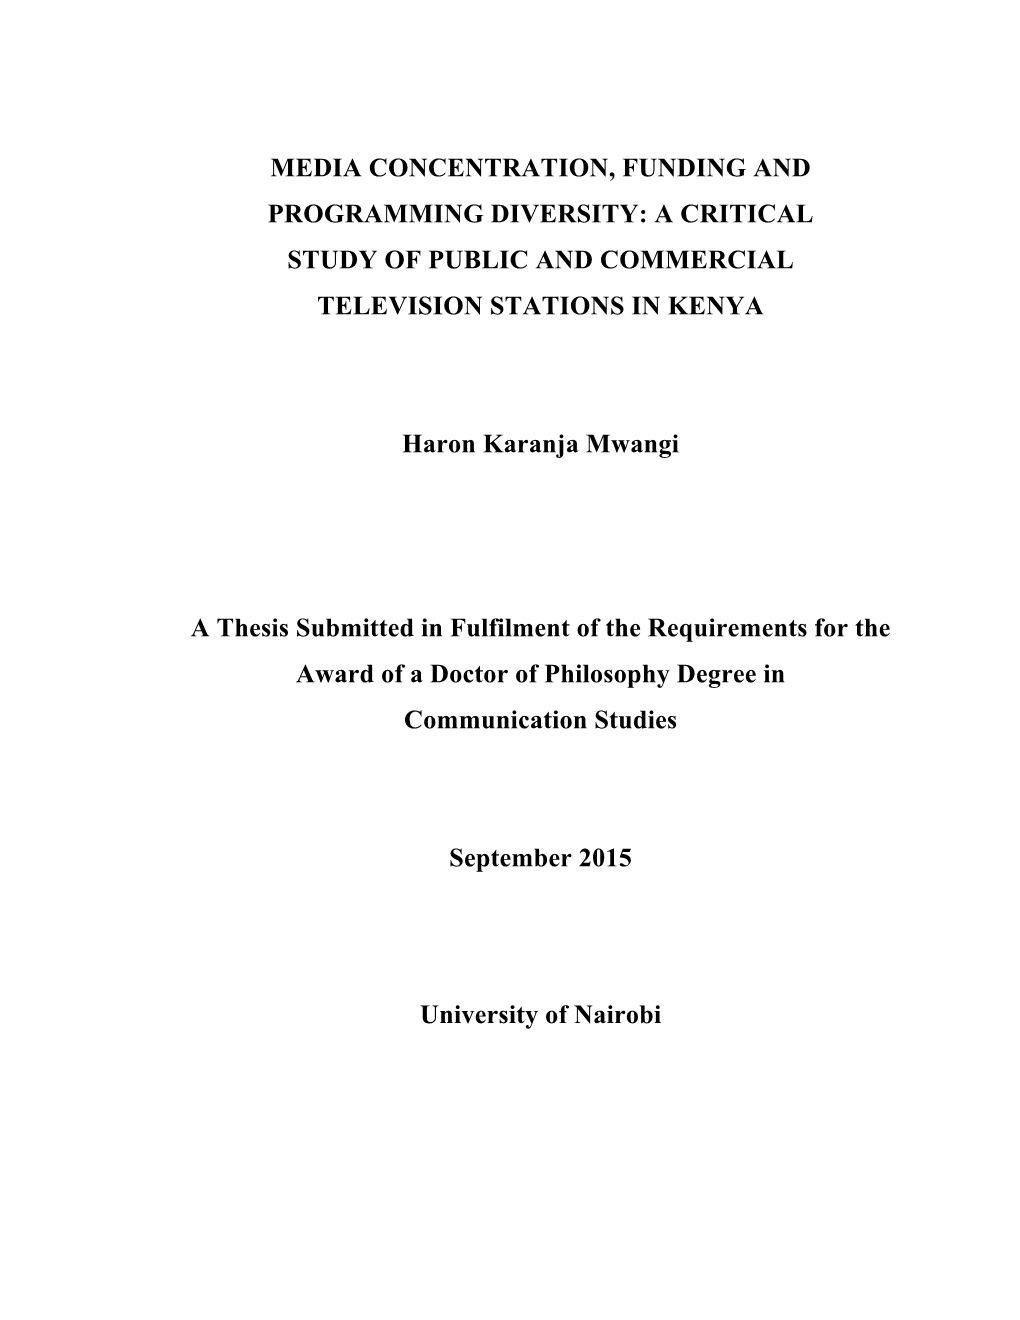 Media Concentration, Funding and Programming Diversity: a Critical Study of Public and Commercial Television Stations in Kenya